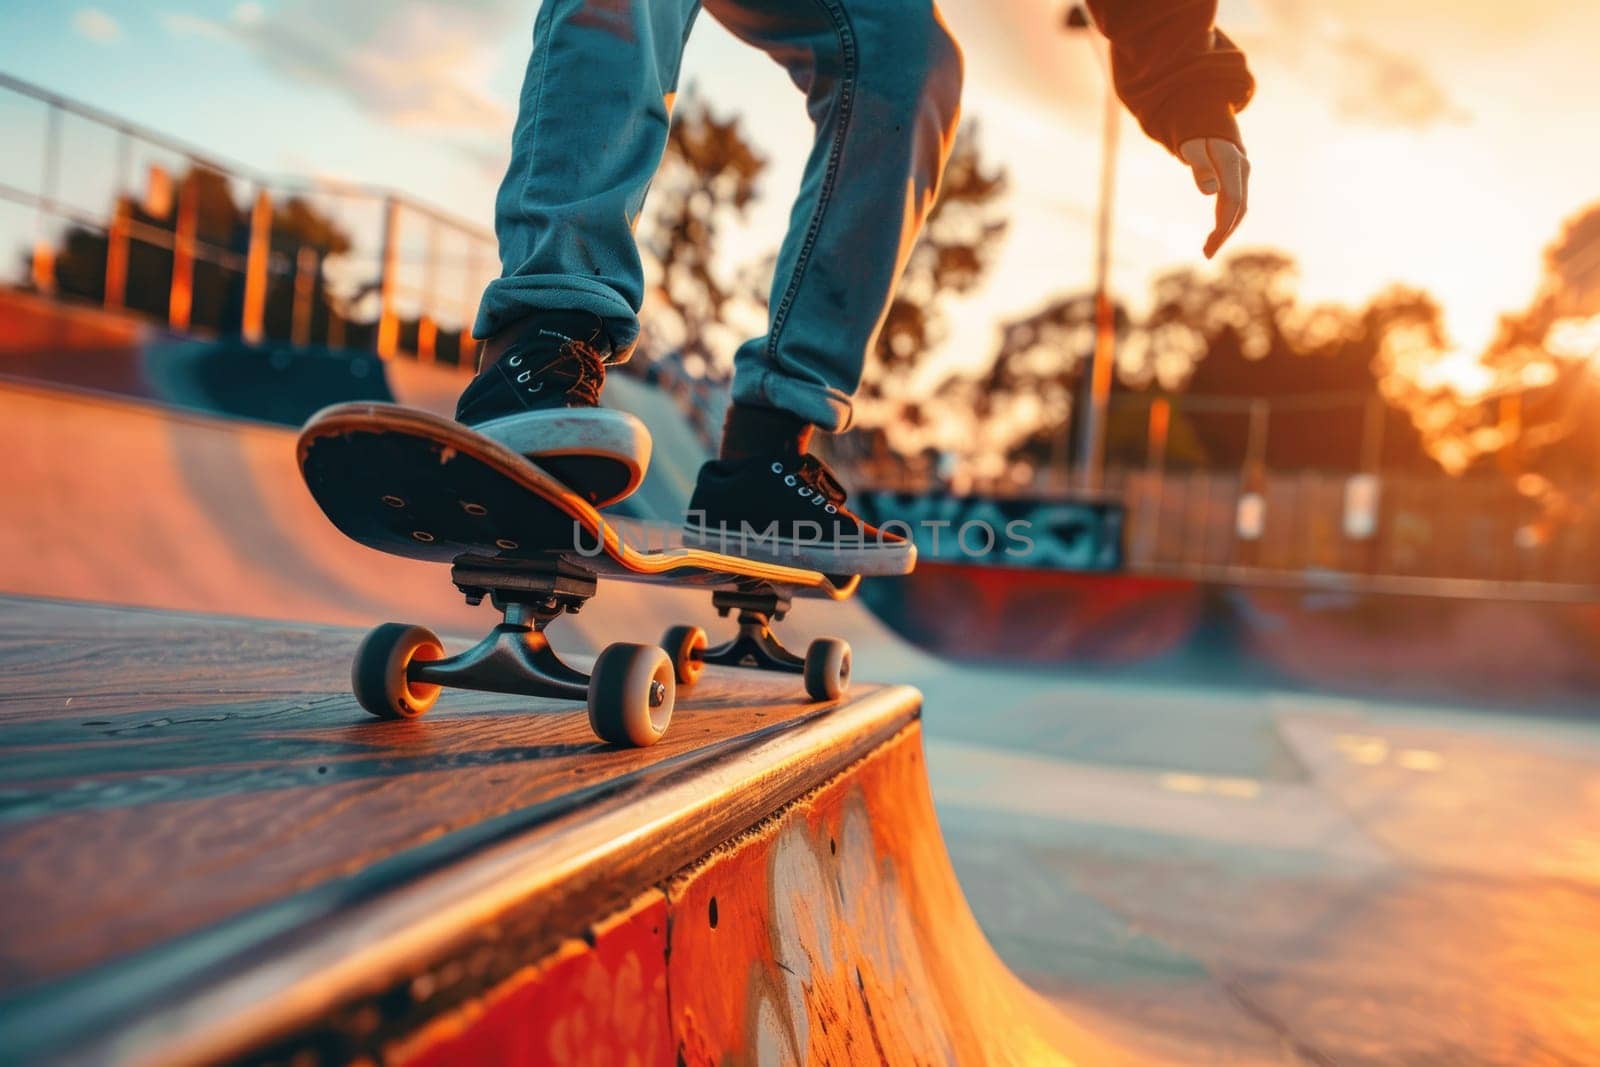 A skateboarder is riding a ramp at a skate park. The sun is setting, casting a warm glow over the scene